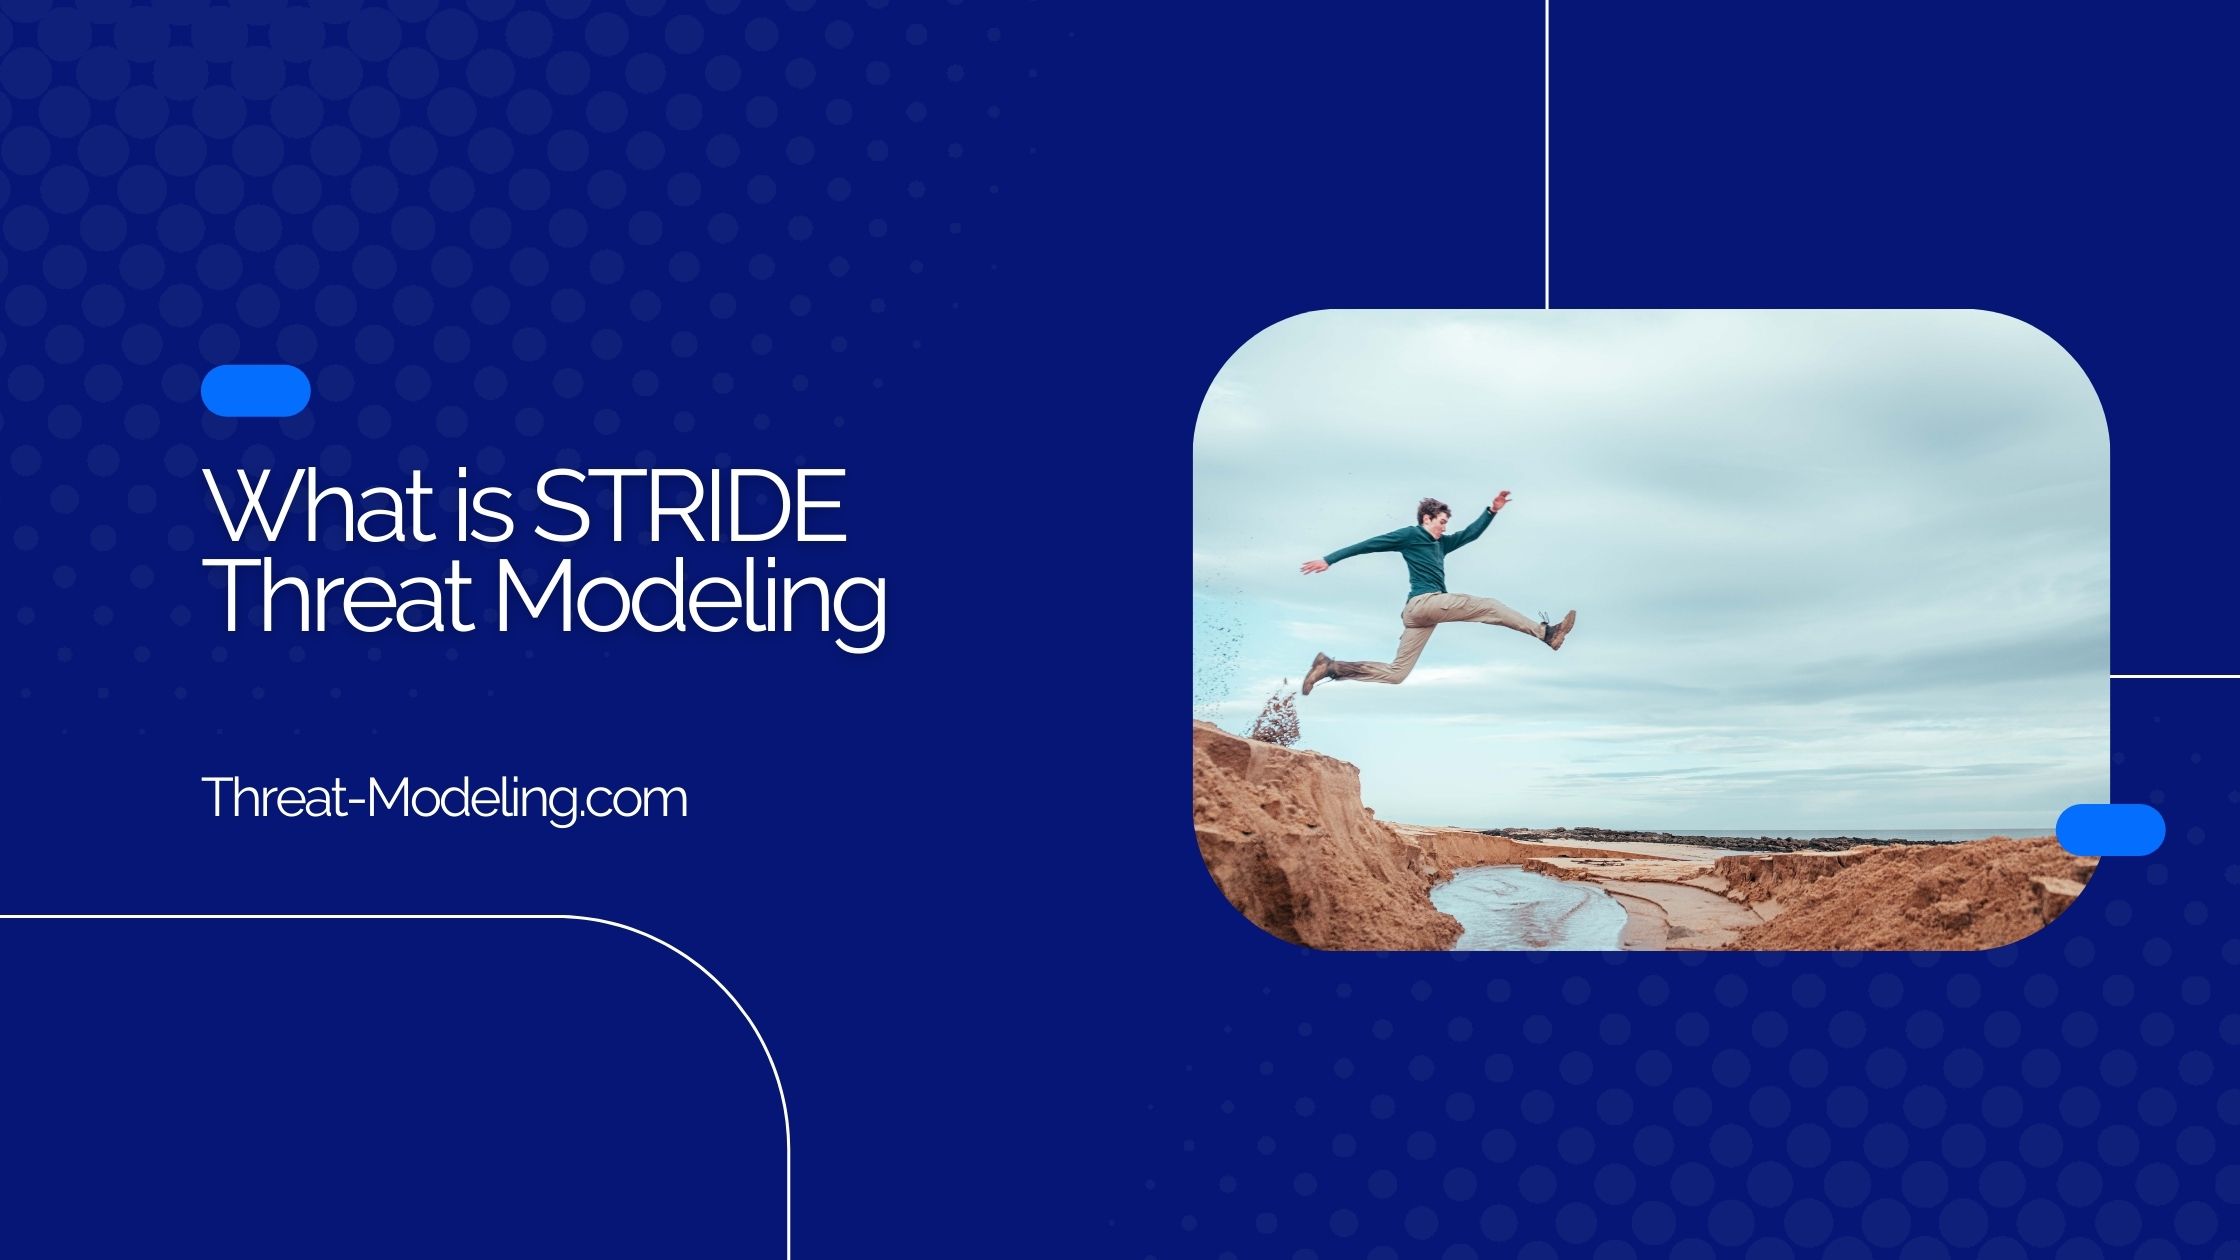 What is STRIDE threat modeling